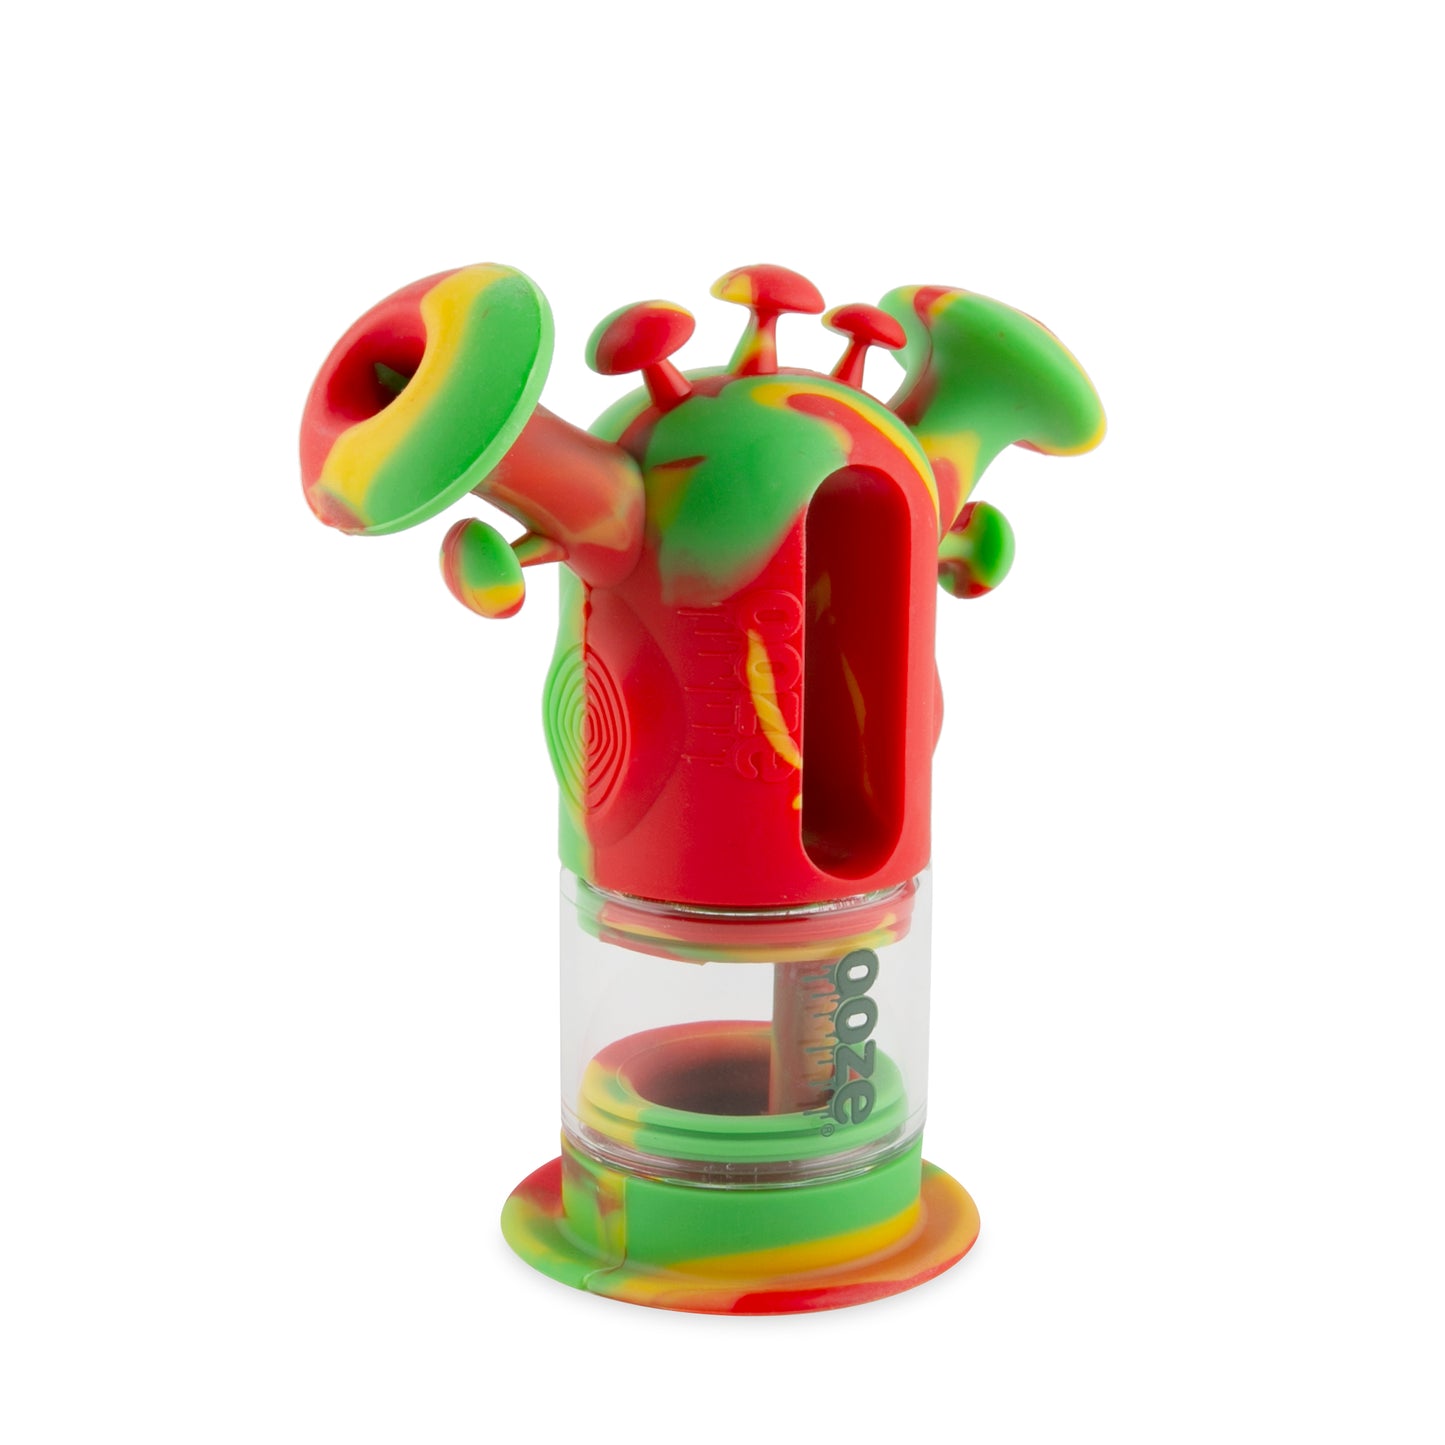 Ooze Trip Pipe Silicone Water Bubbler & Dab Rig - Rasta